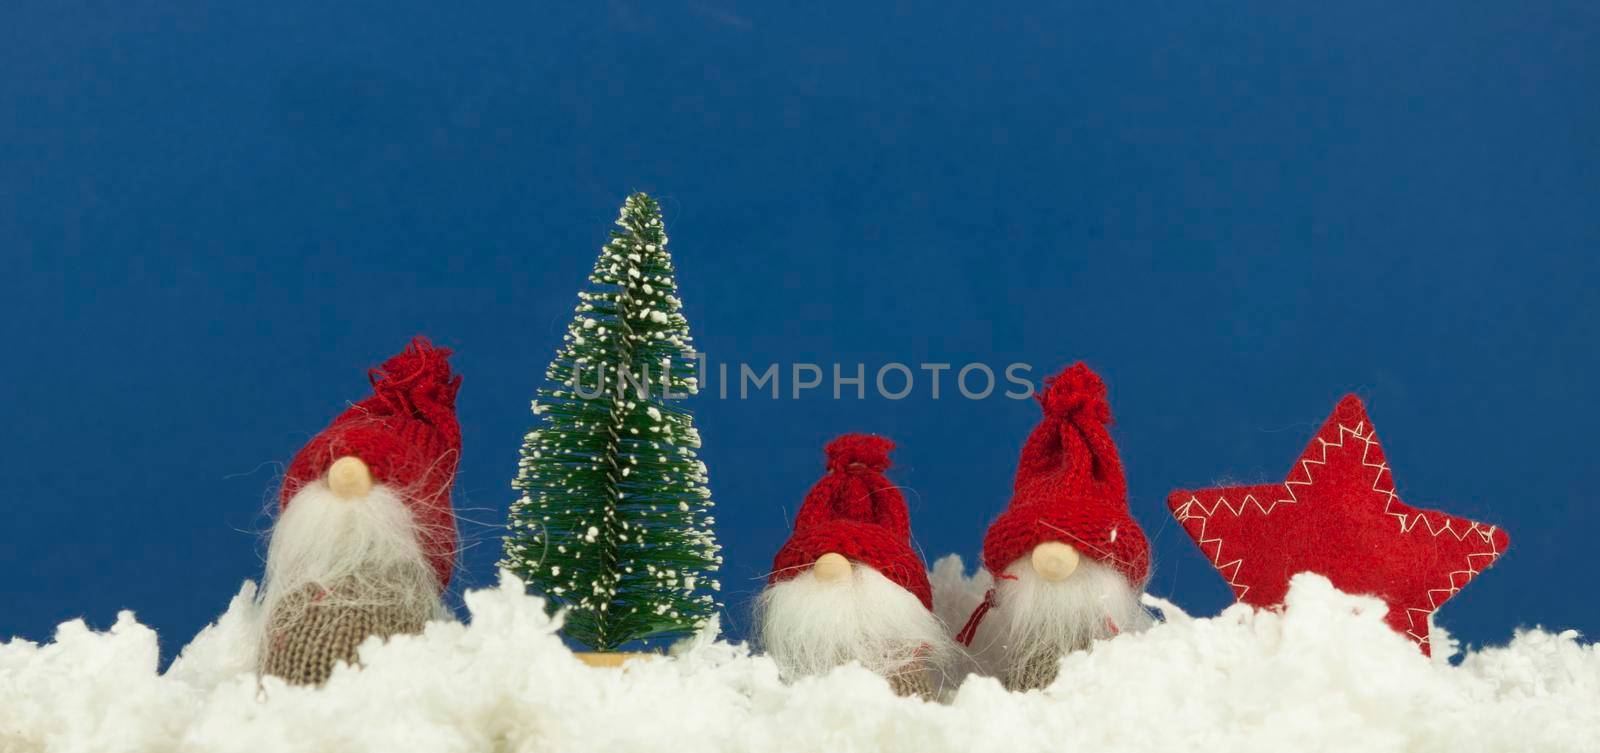 Christmas card made of fir tree with viburnum berries and toy gnome on the wooden rustic background.Christmas background.Copy space for text